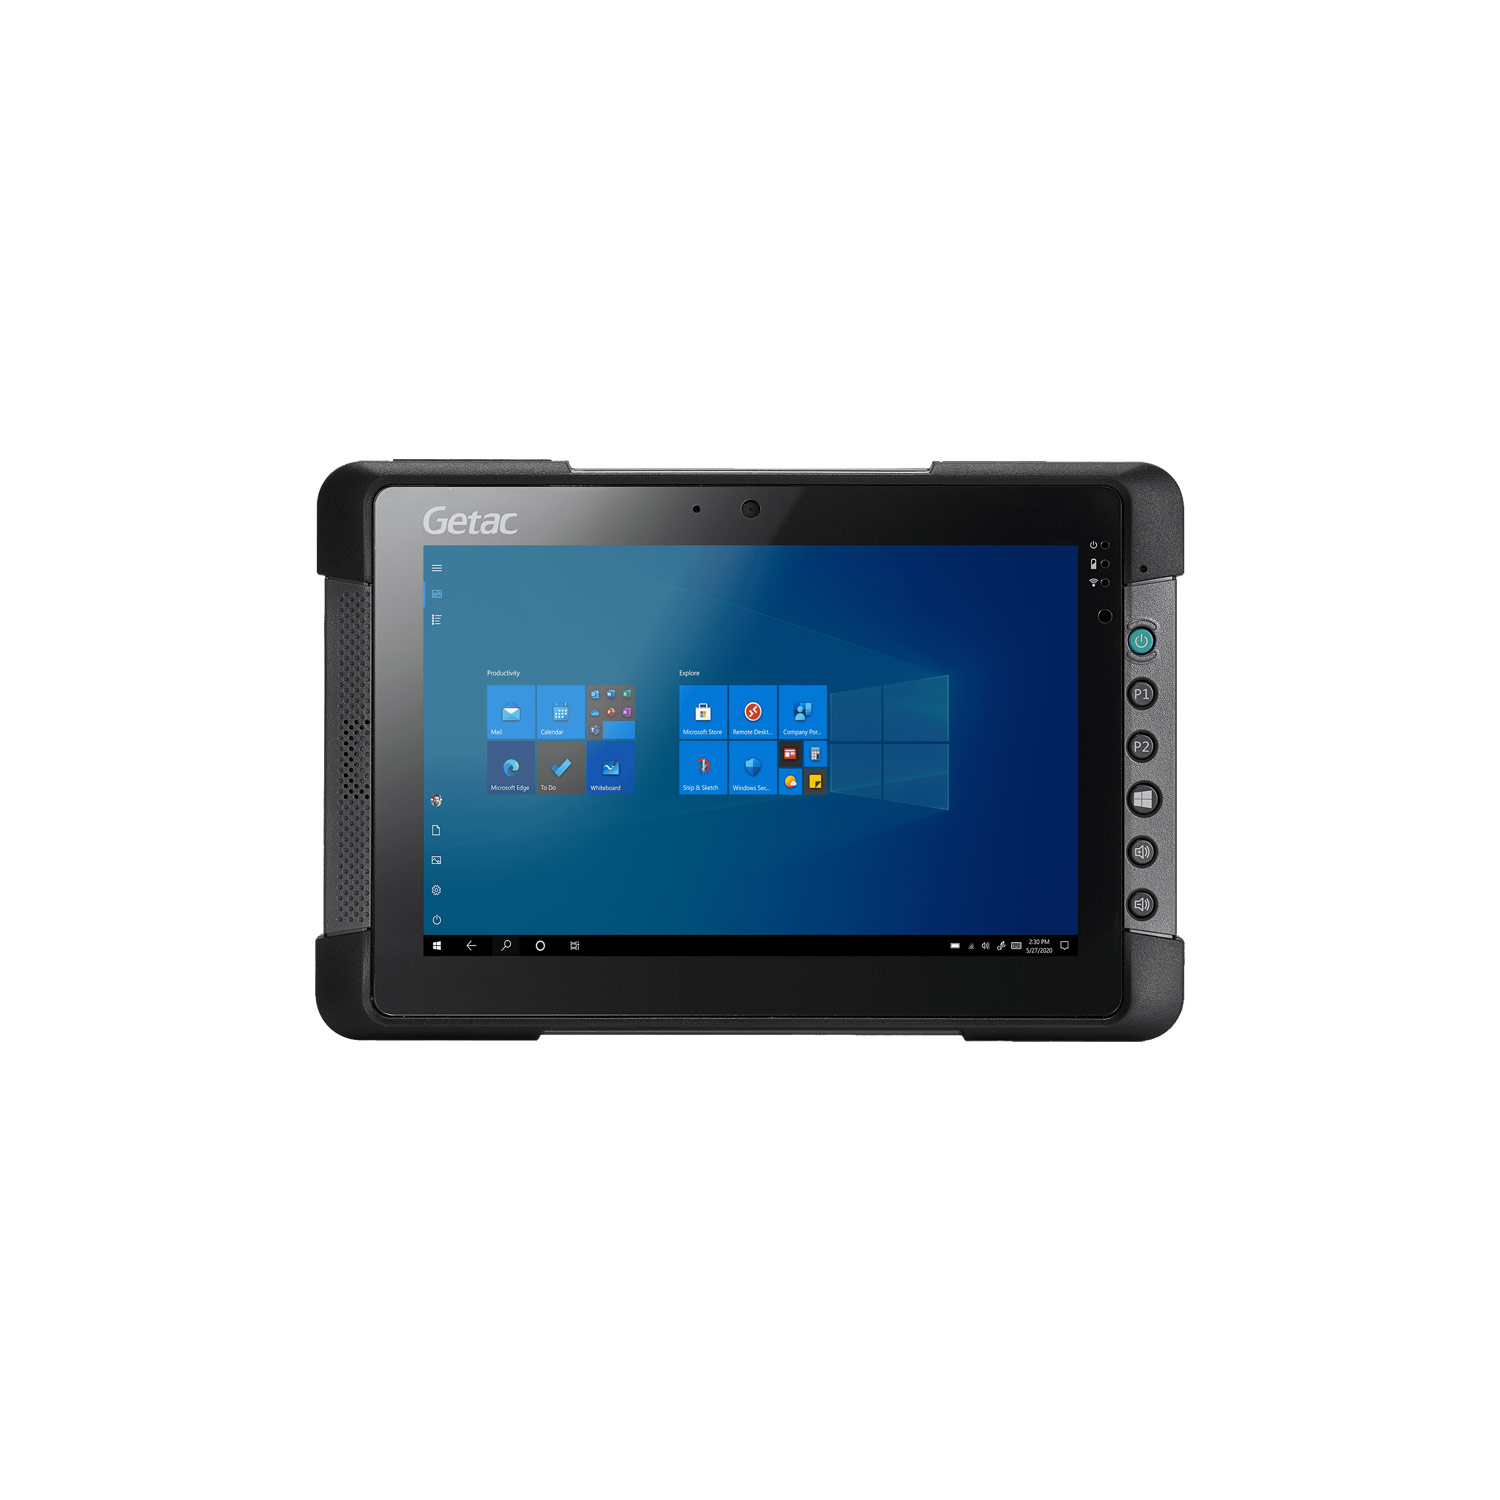 Fully Rugged Tablet-Getac T800